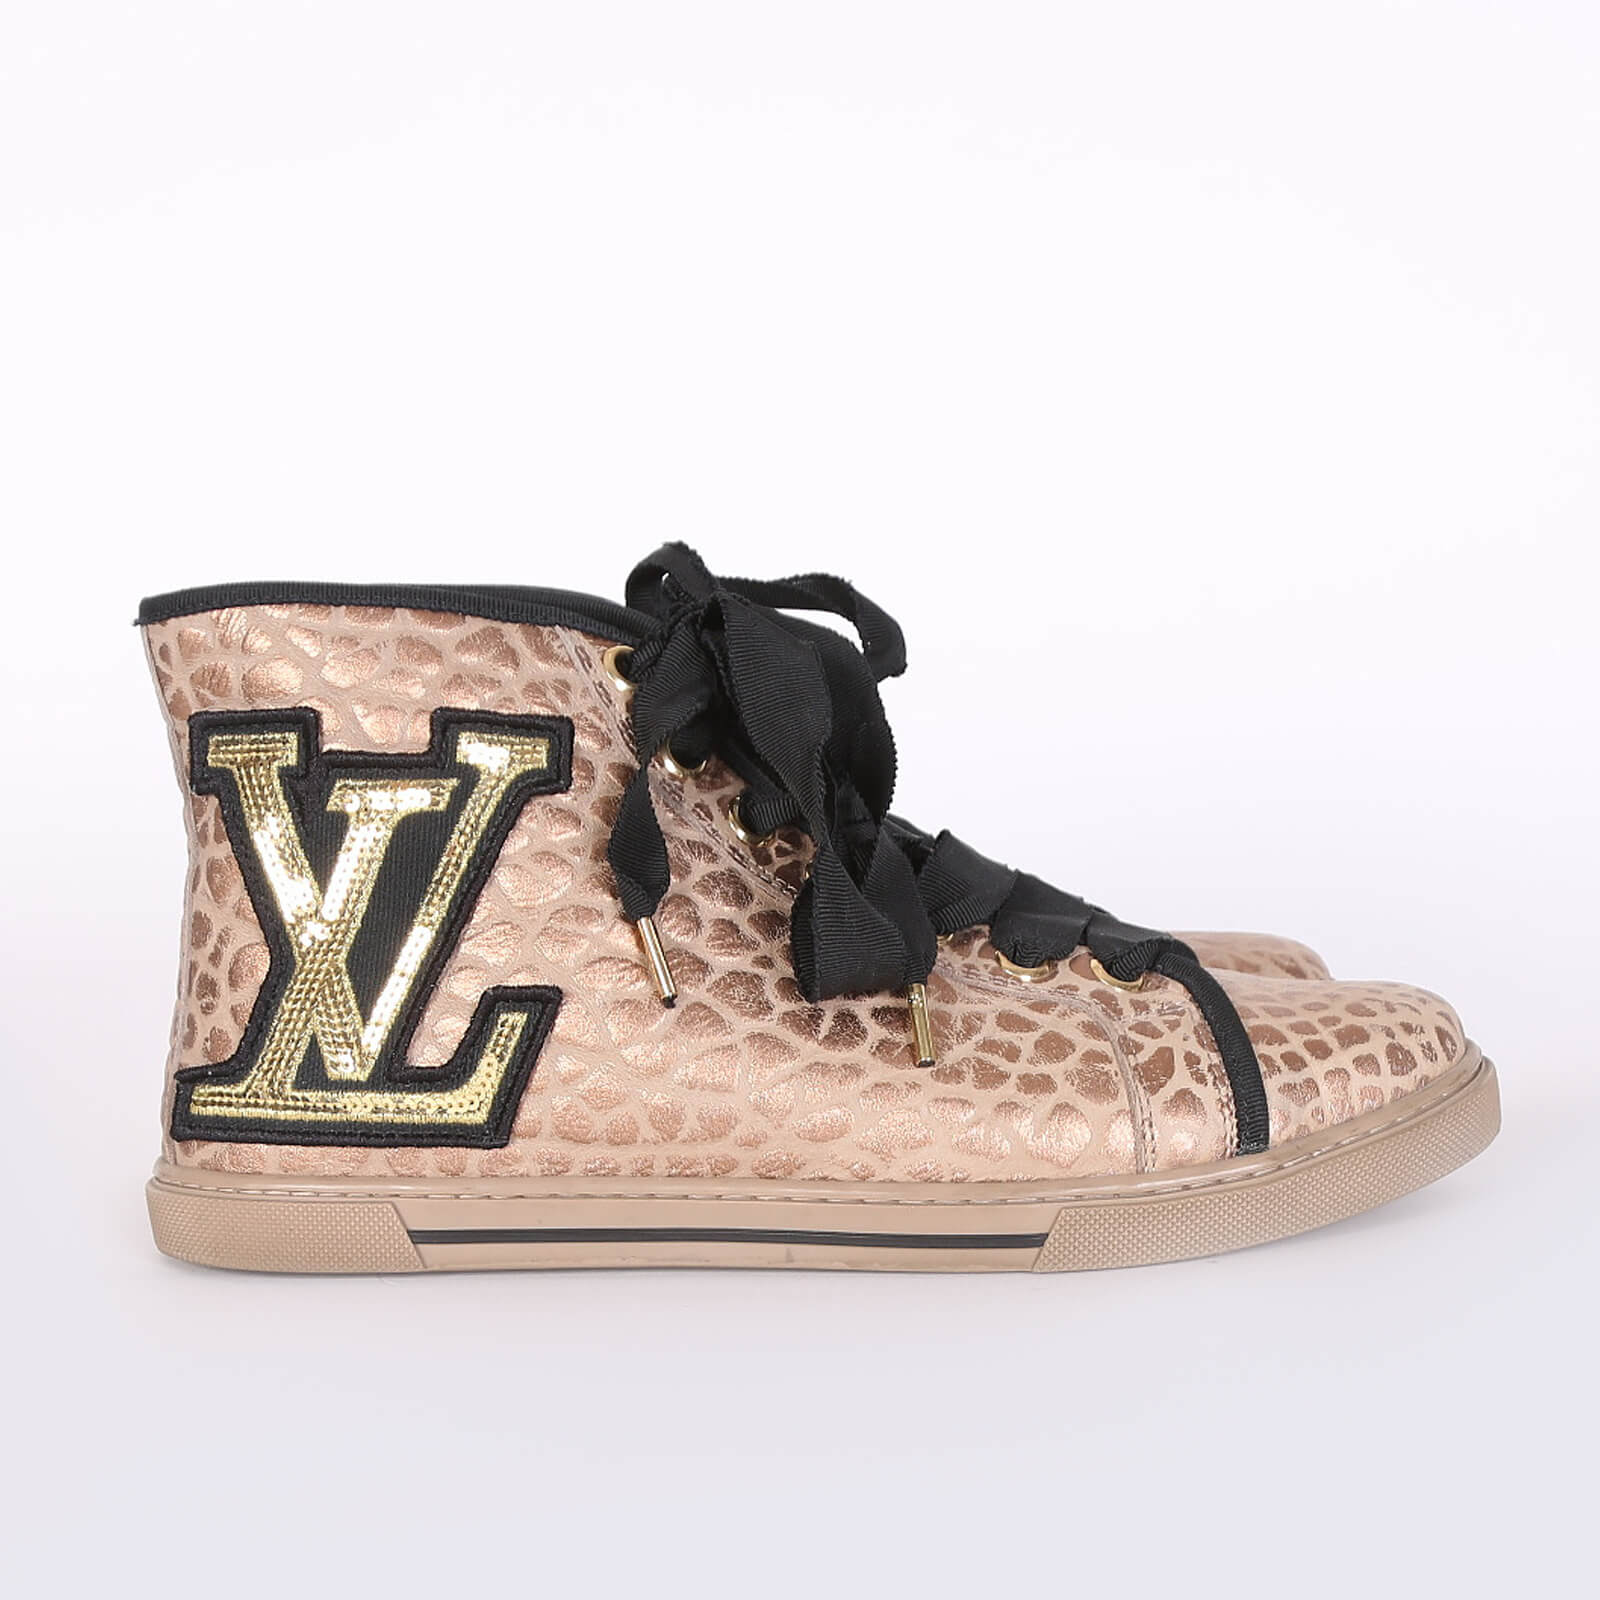 LOUIS VUITTON Suede Sequins Perforated Punchy High Top Sneakers 38